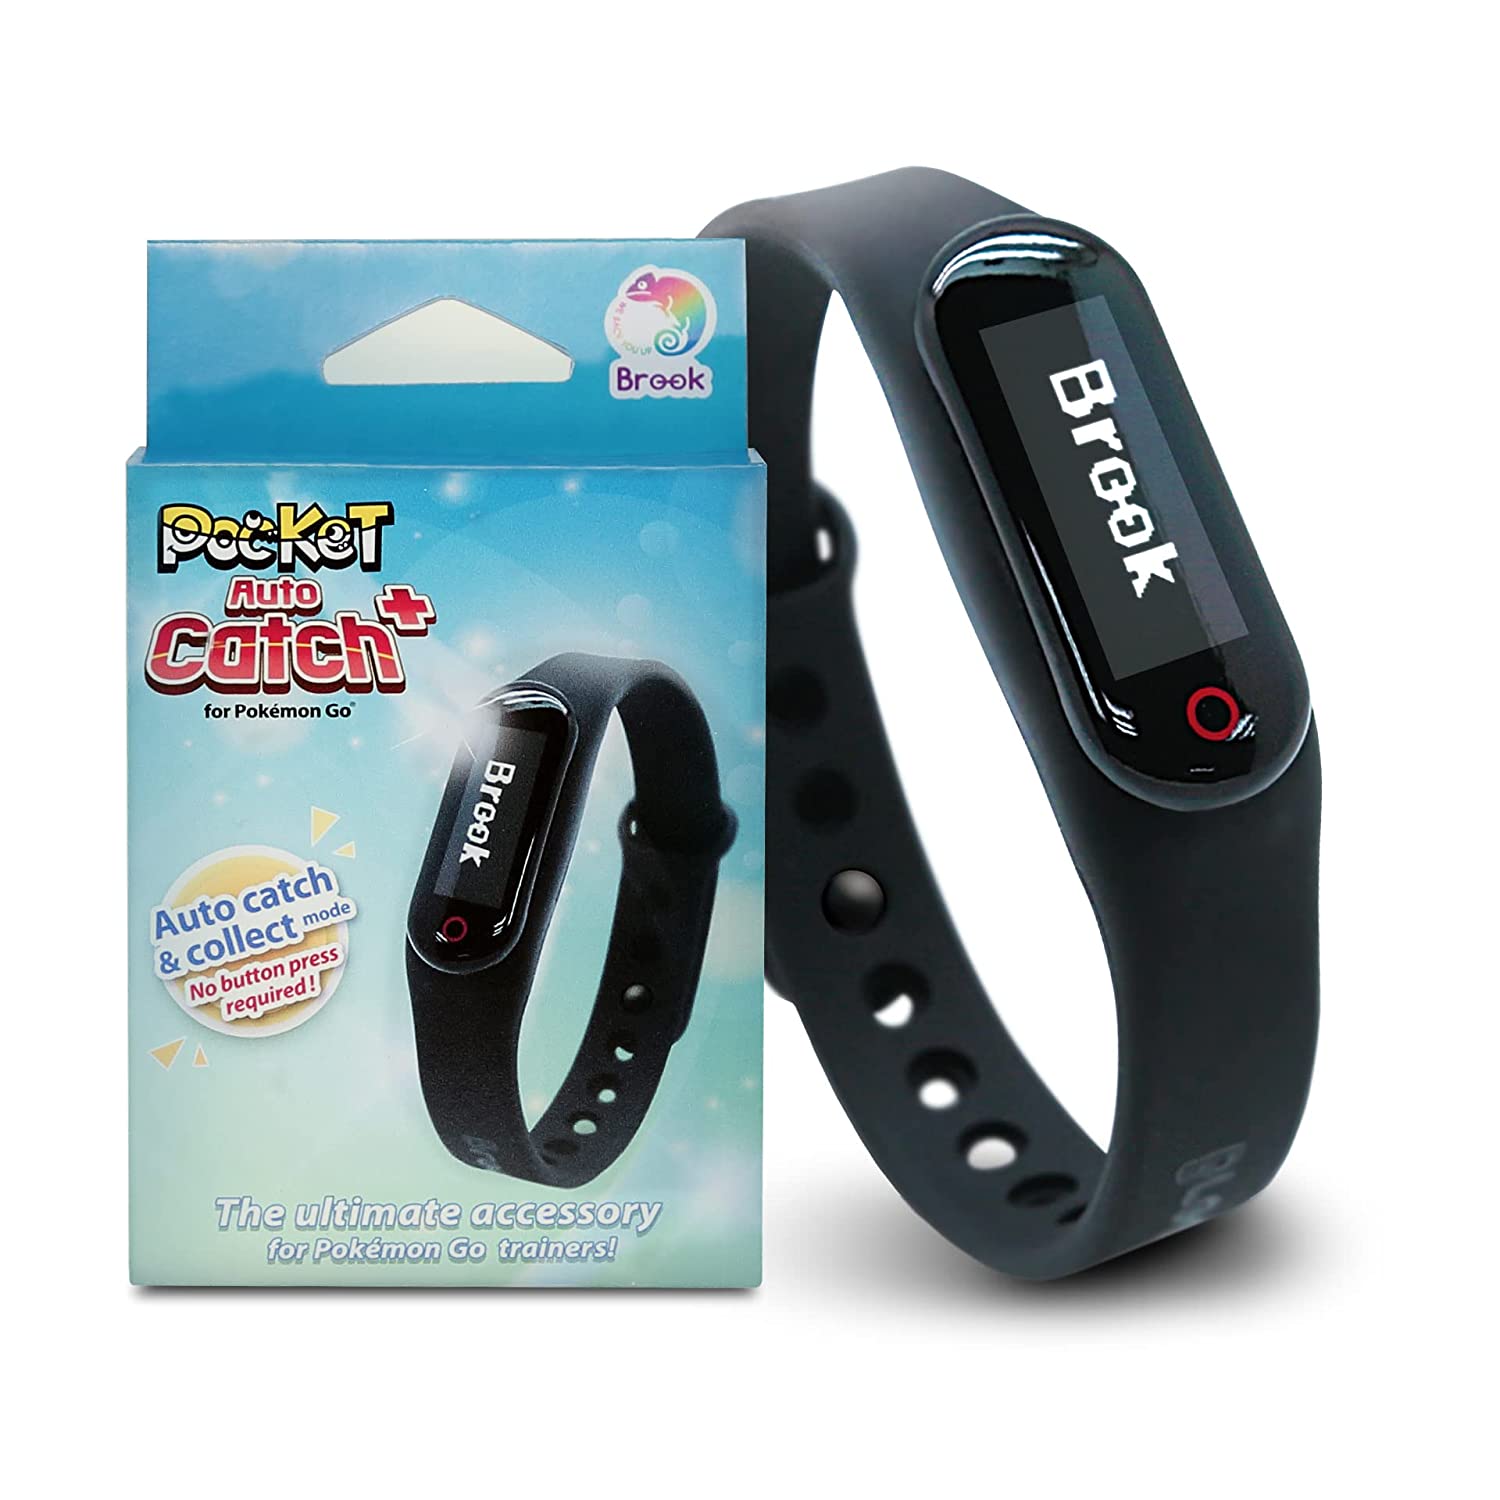 Brook Pocket Auto Catch Plus - Upgraded Version of Auto Catch, Auto Spin and Catching pocket monsters, Collecting Items, Wristband Bracelet Accessory